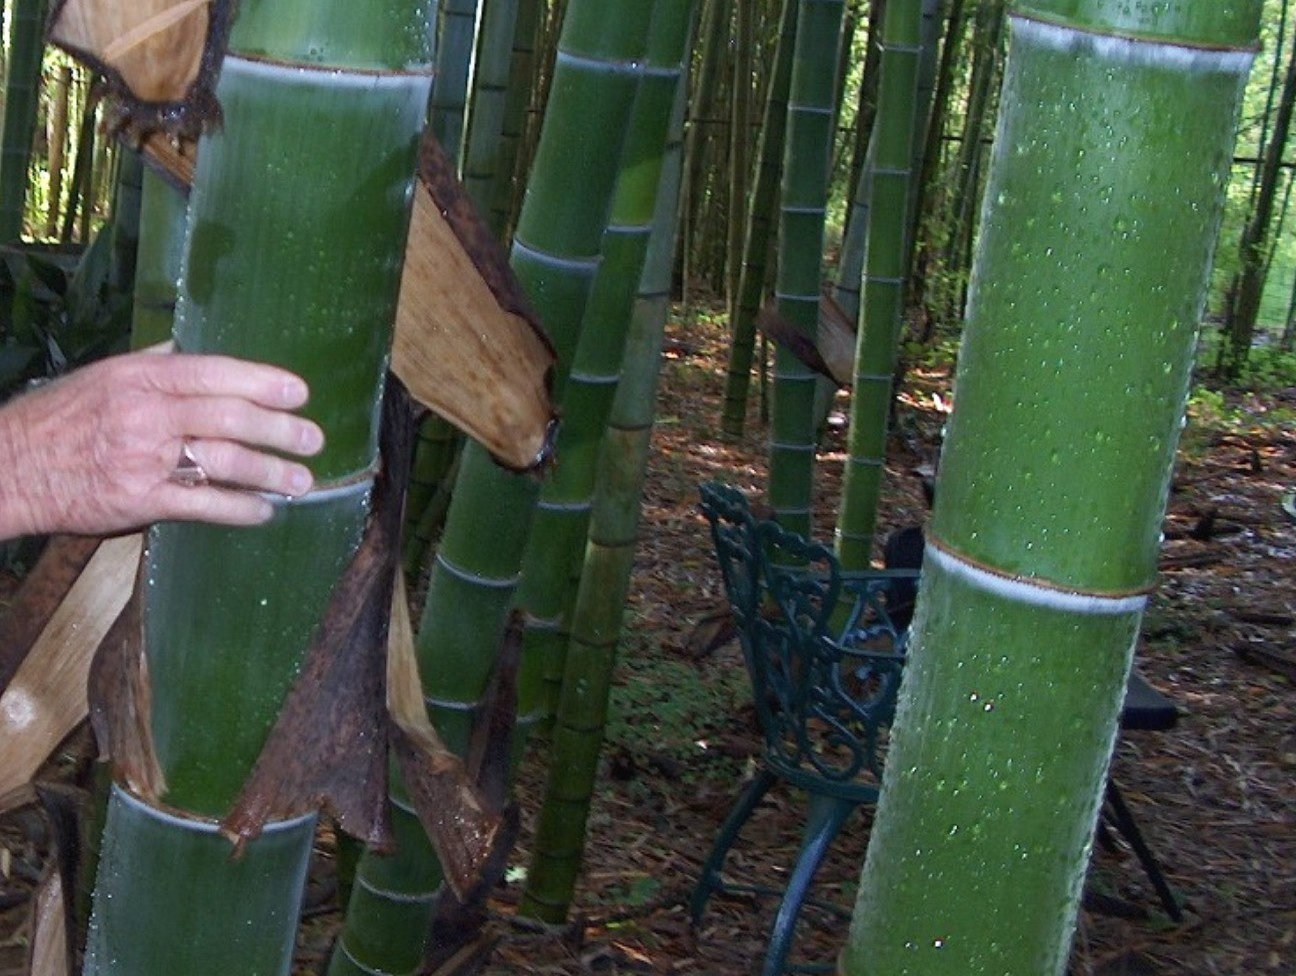 Phyllostachys heterocycla pubescens 'Moso' / Moso Timber Bamboo